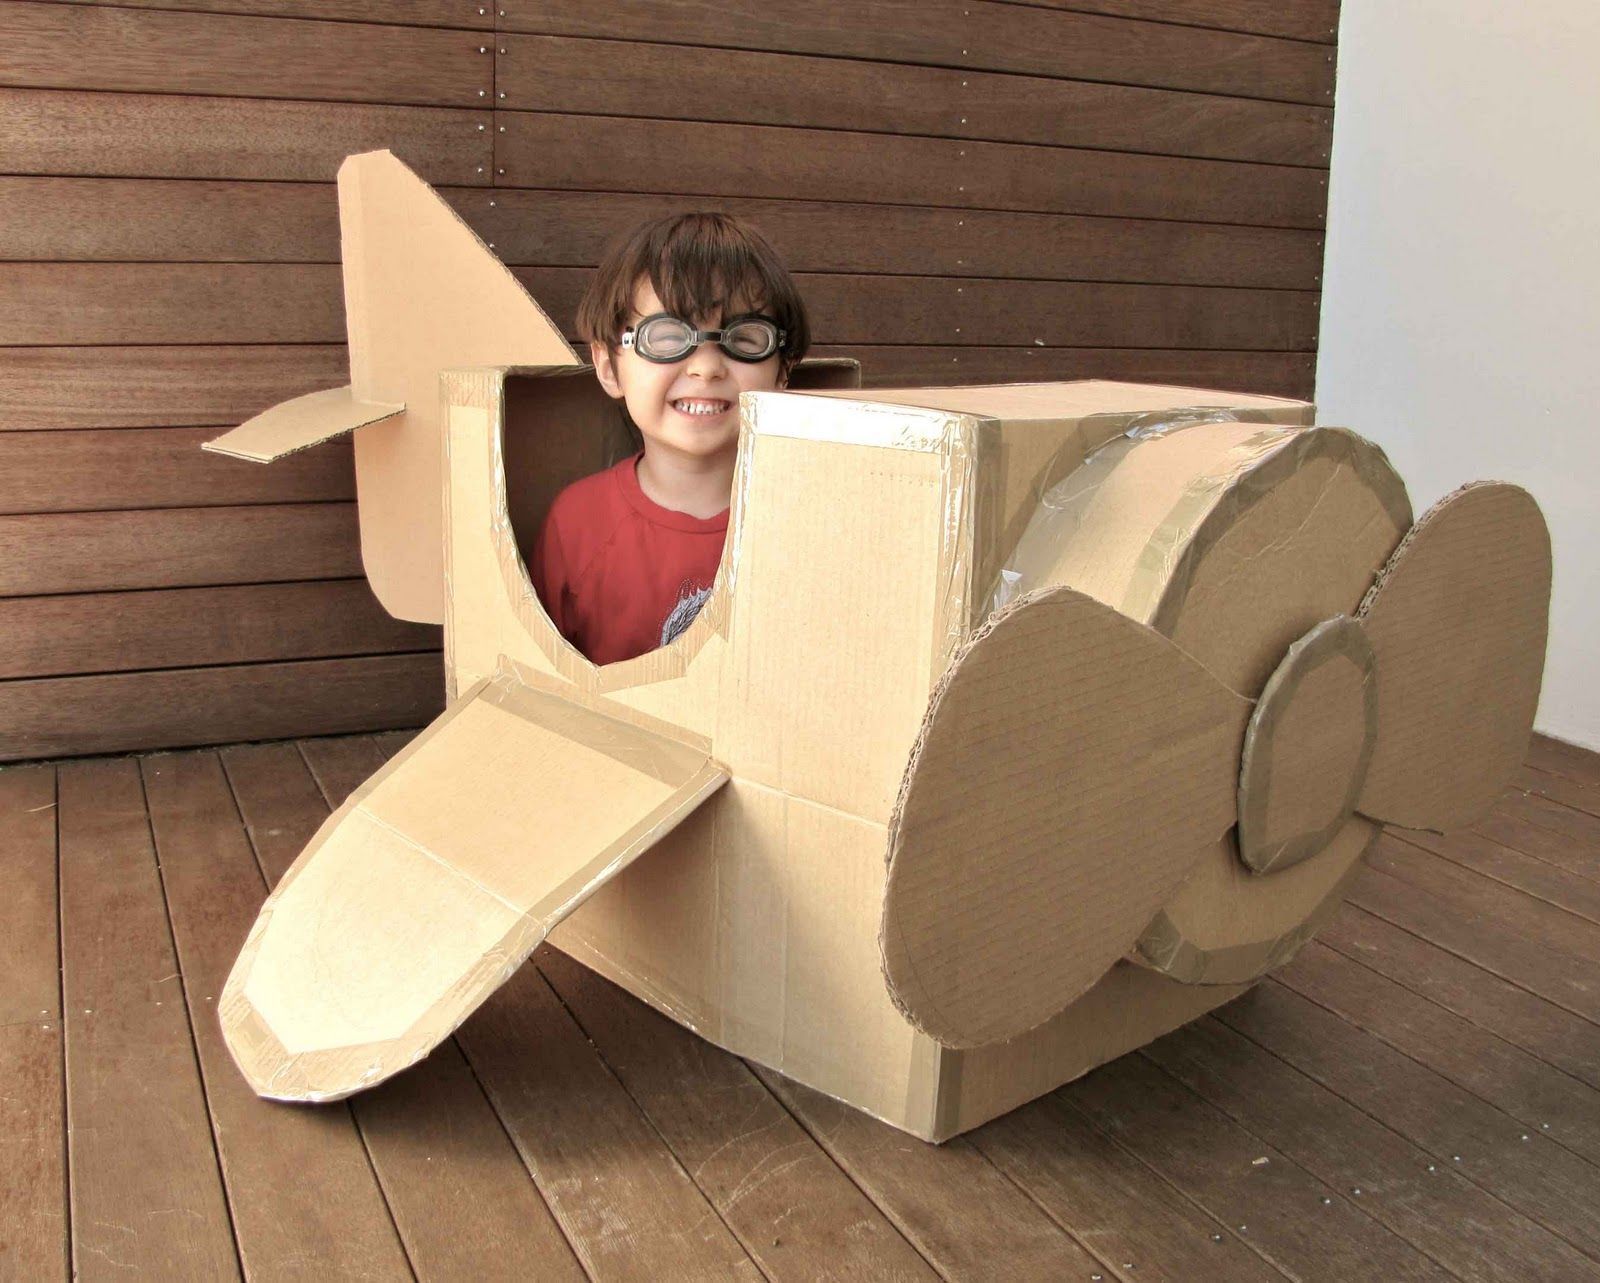 9 toy projects to create with kids from big cardboard boxes. My personal favorite is the